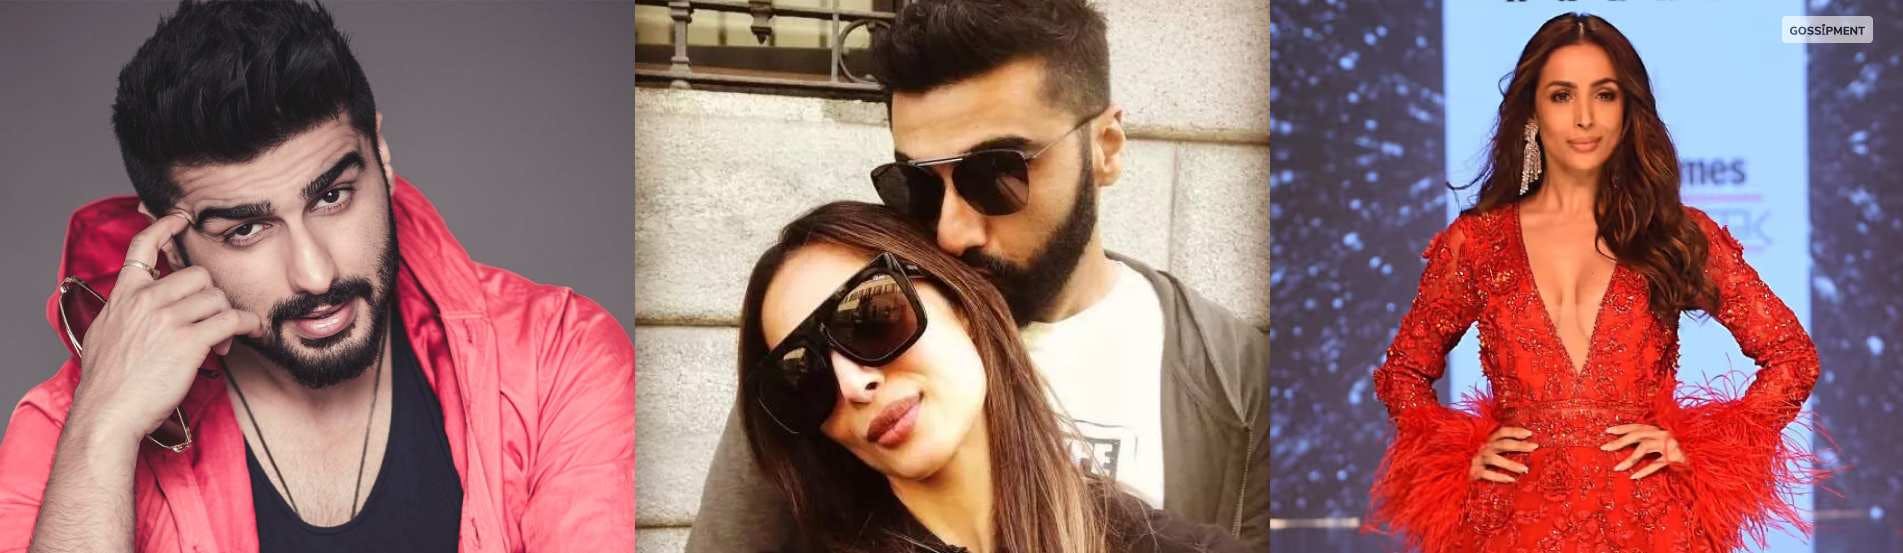 Cover Image for “I Said Yes”— Is Malaika Arora Getting Married To Arjun Kapoor? Congratulations!